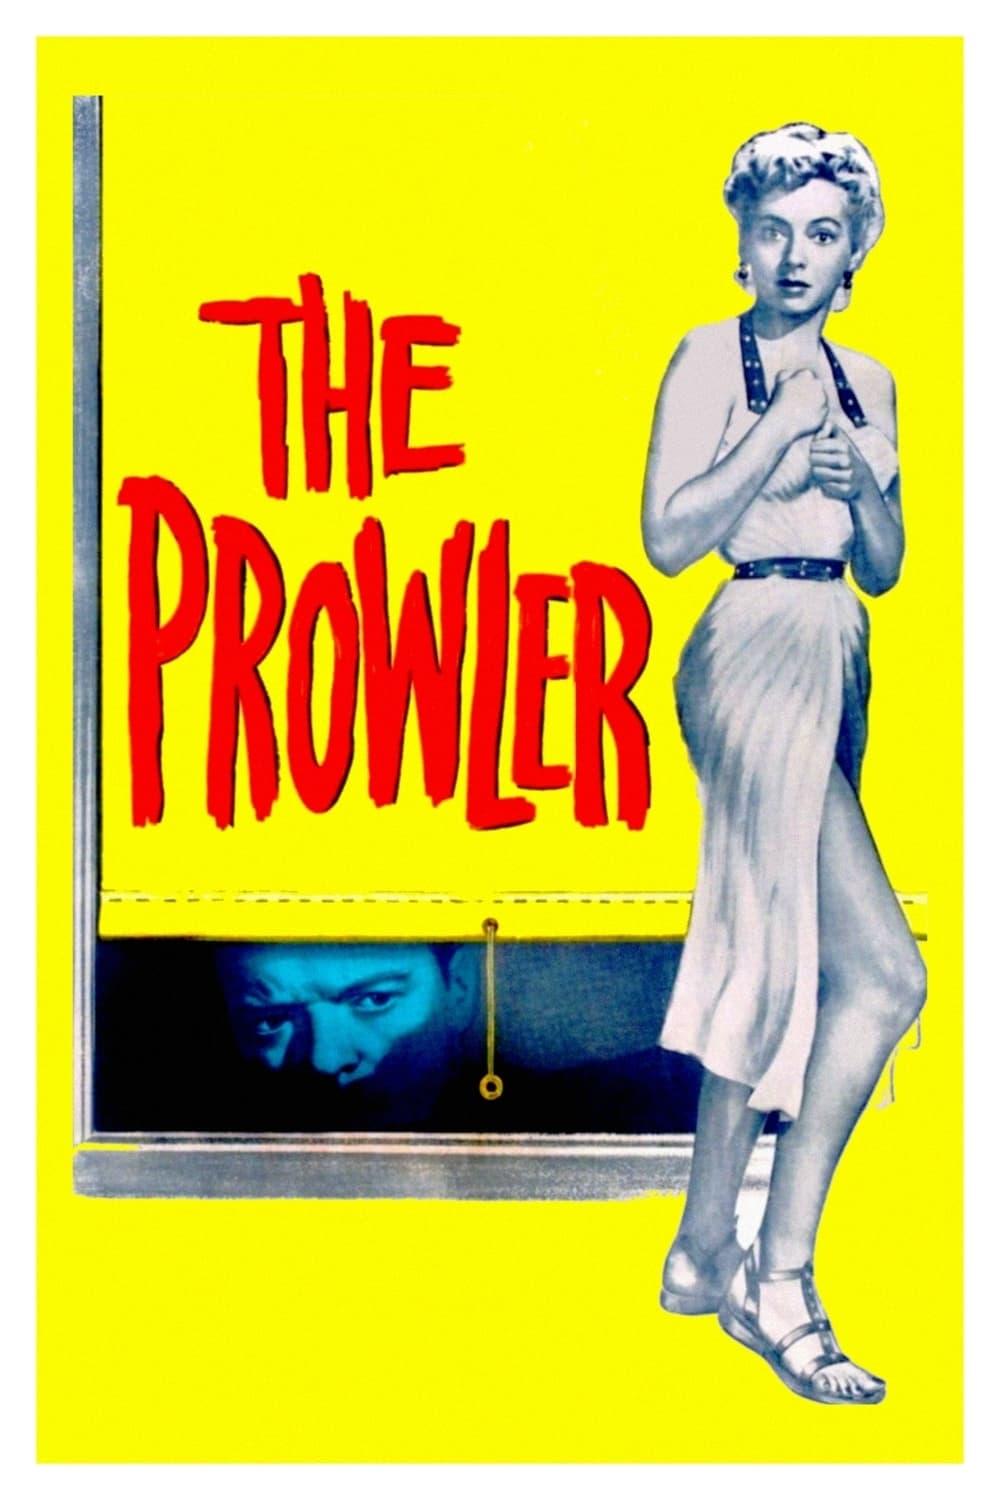 The Prowler poster